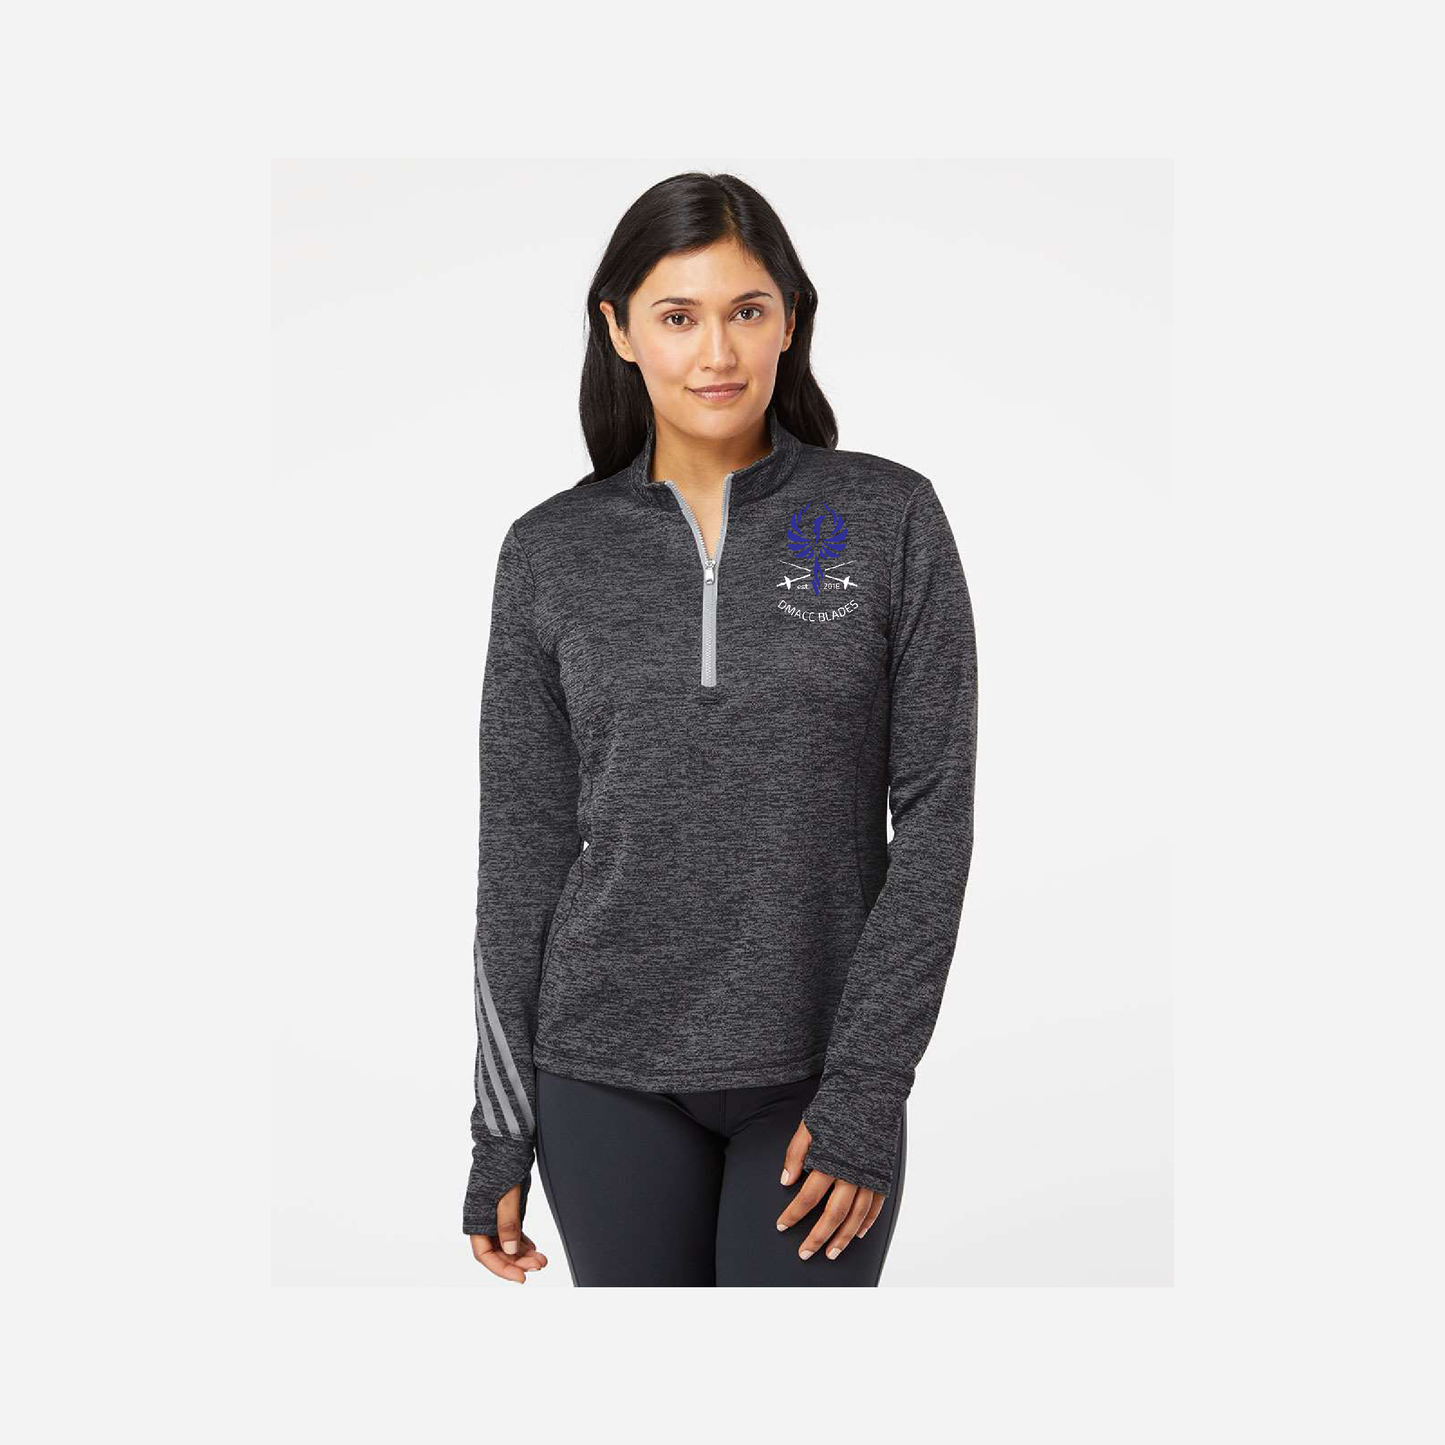 DMACC Blades Adidas Women's Brushed Terry Quarter-Zip Pullover